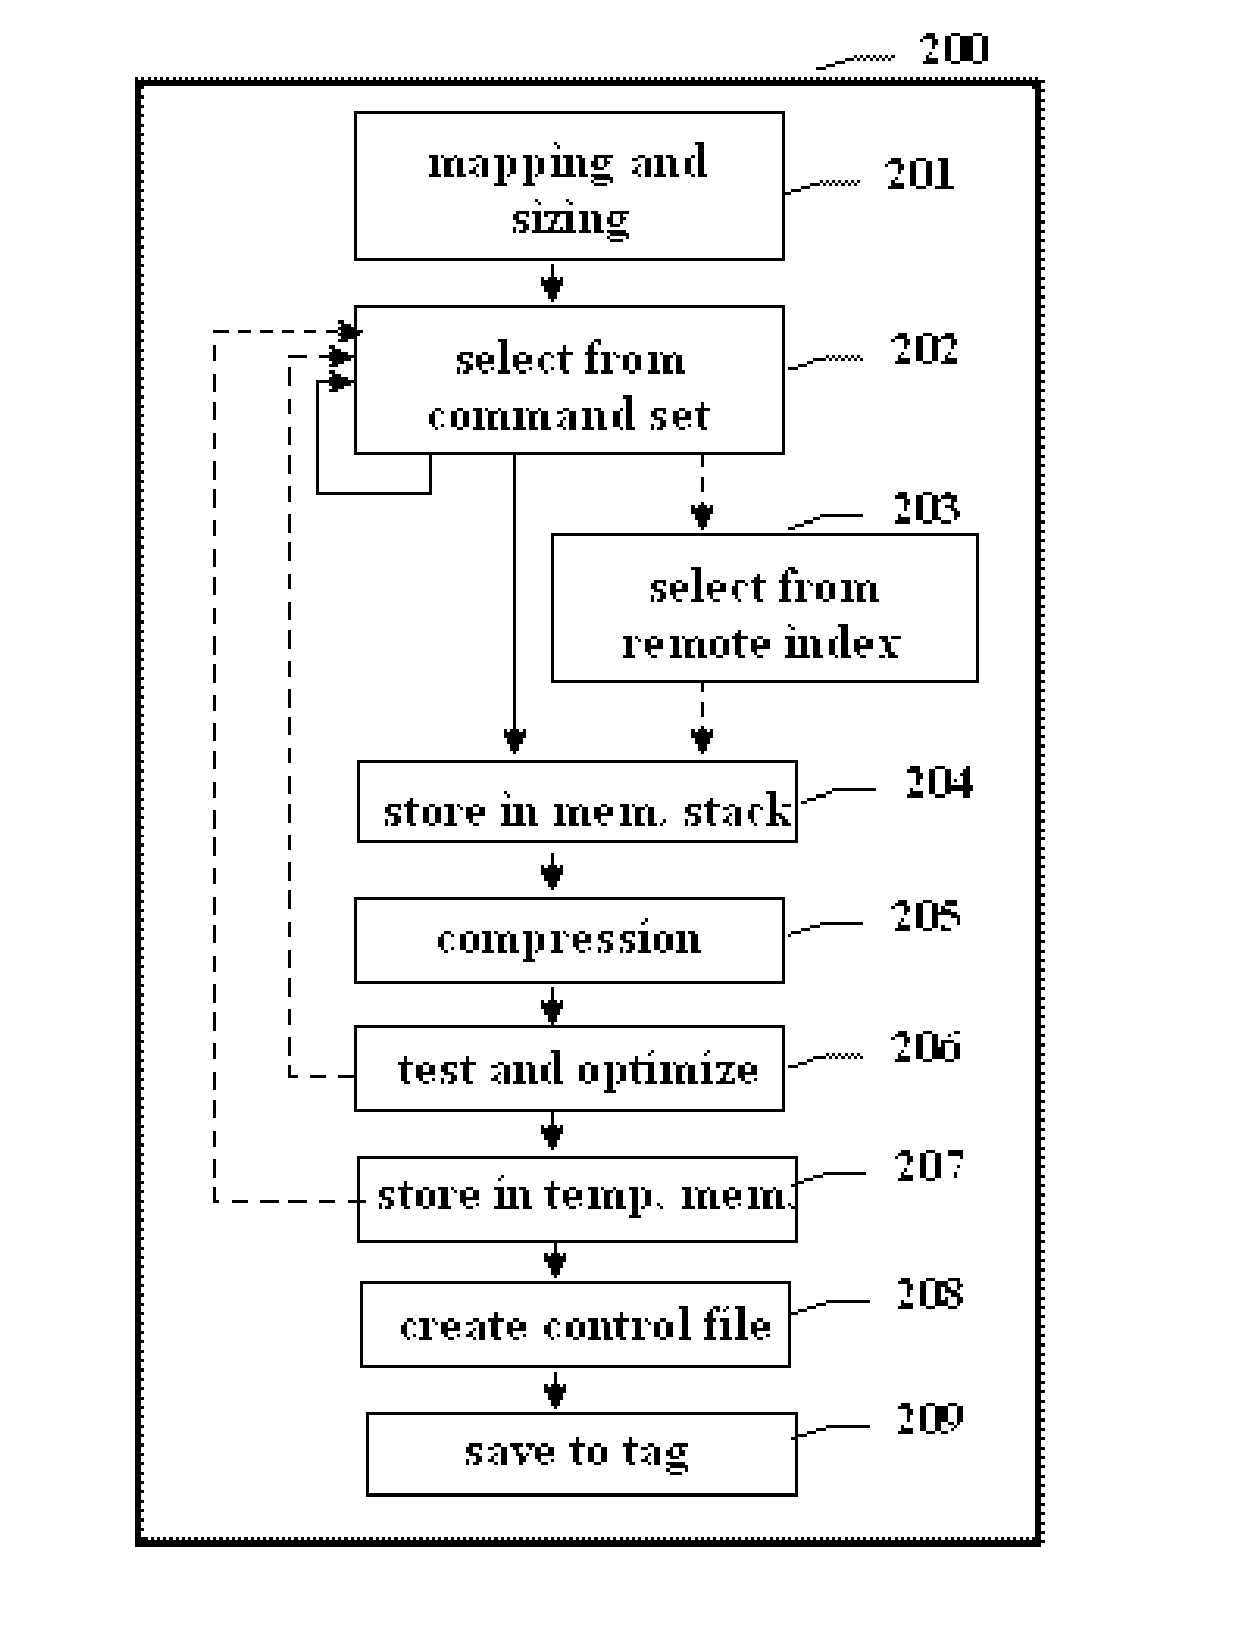 Methods and apparatus to load and run software programs in data collection devices